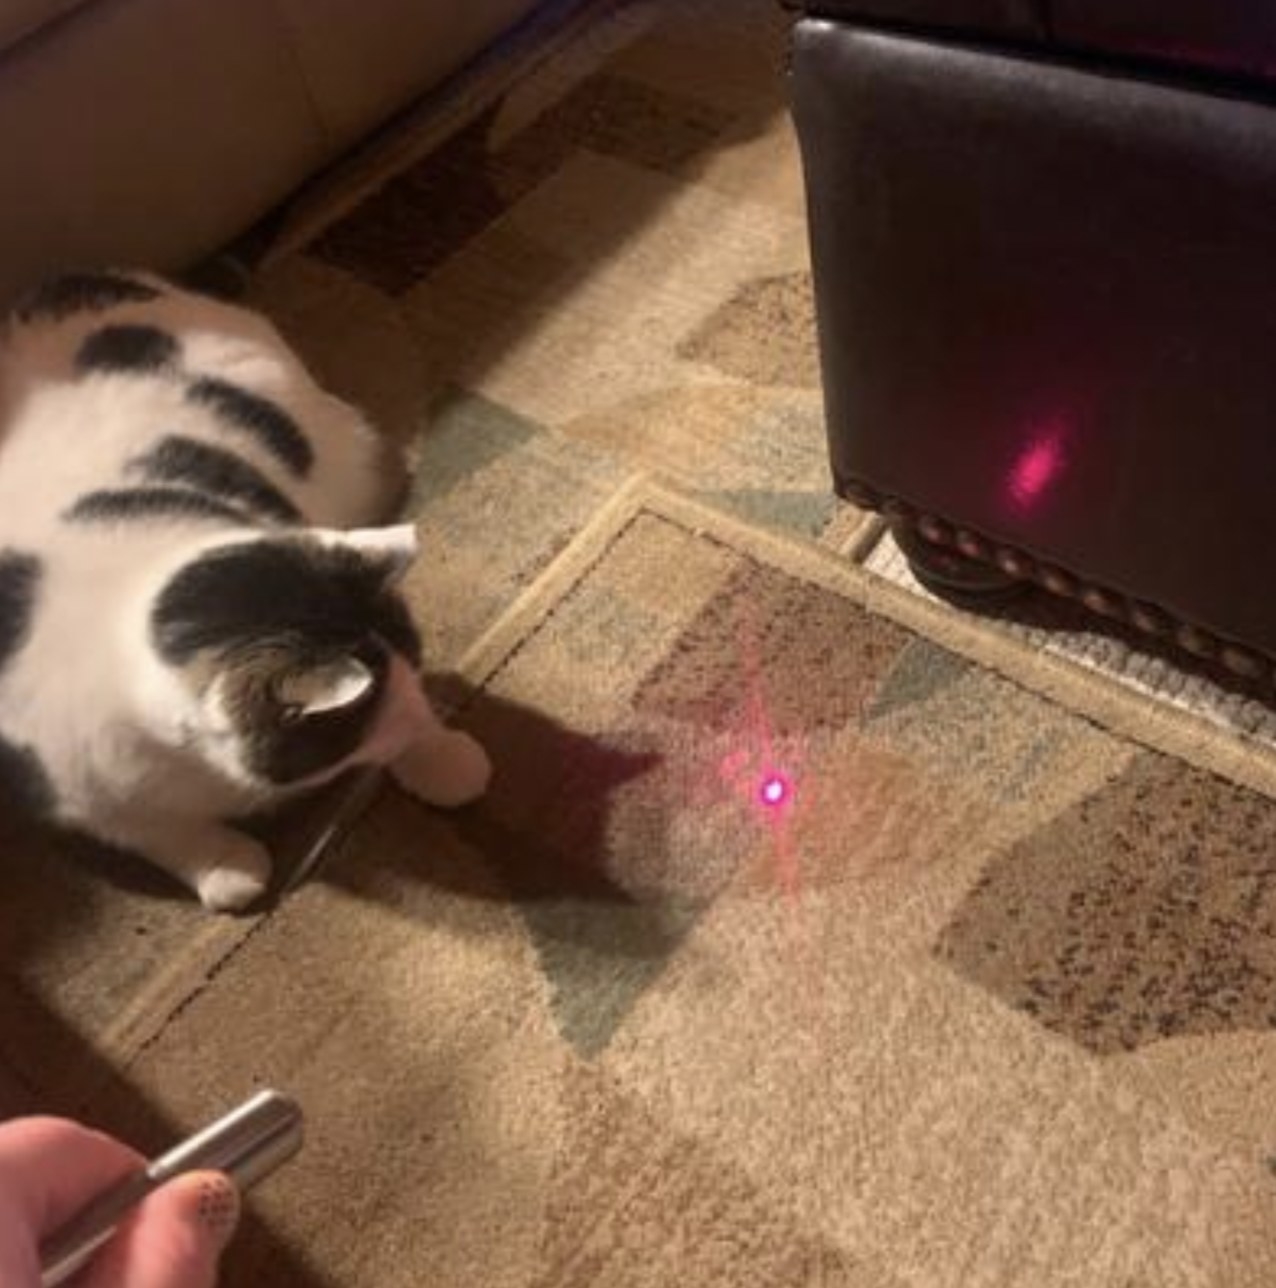 a cat staring at a laser pointed on the ground